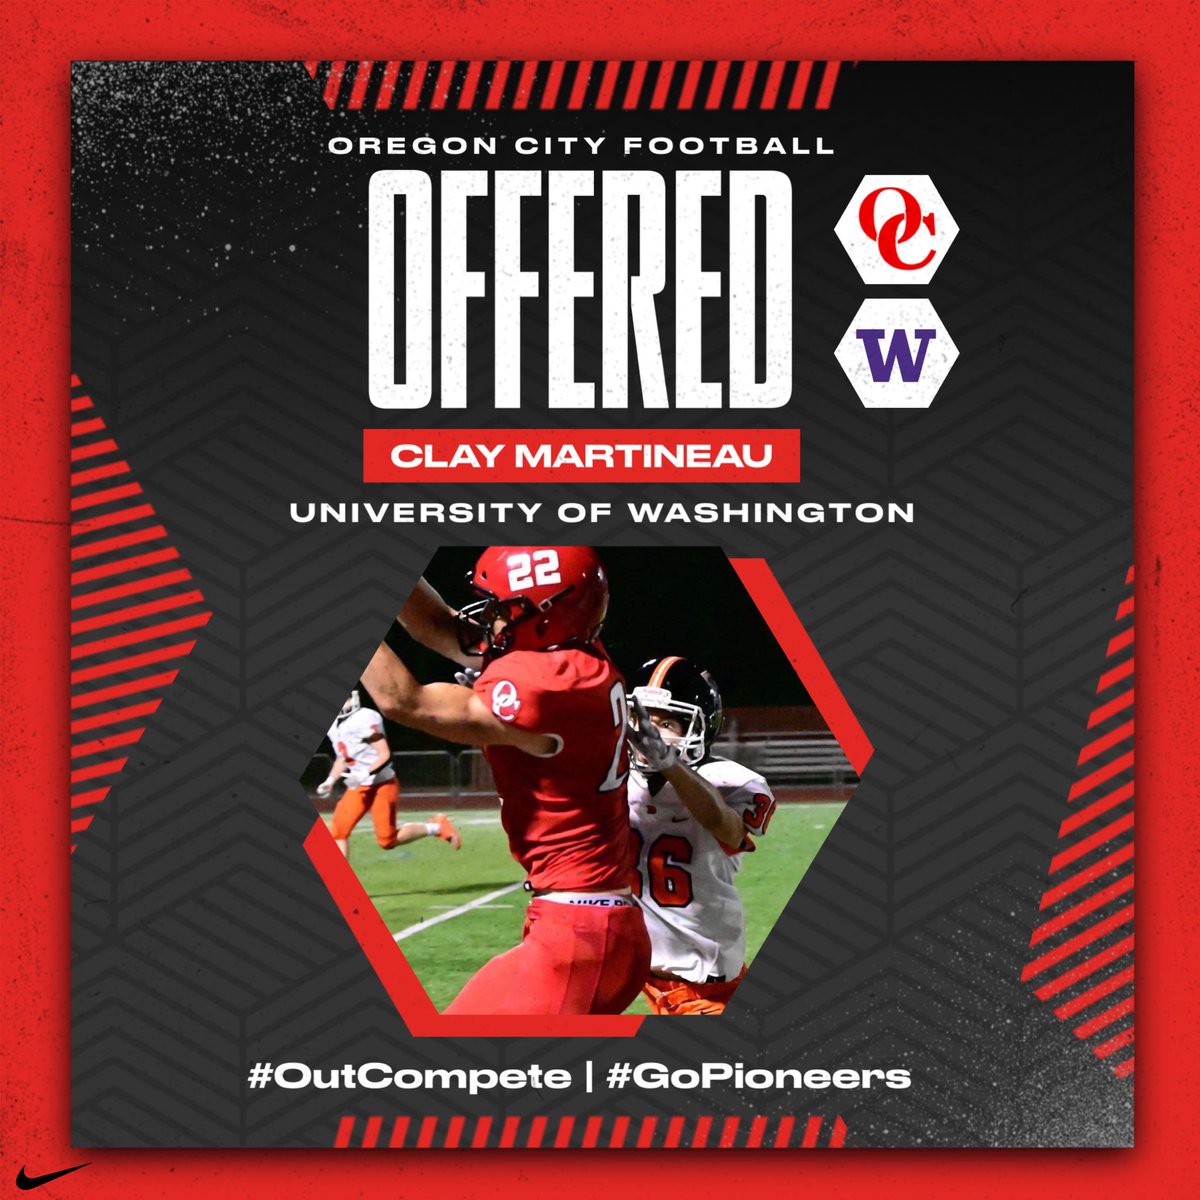 👏 Congratulations to Clay Martineau on his offer from the University of Washington!

#OutCompete | #GoPioneers